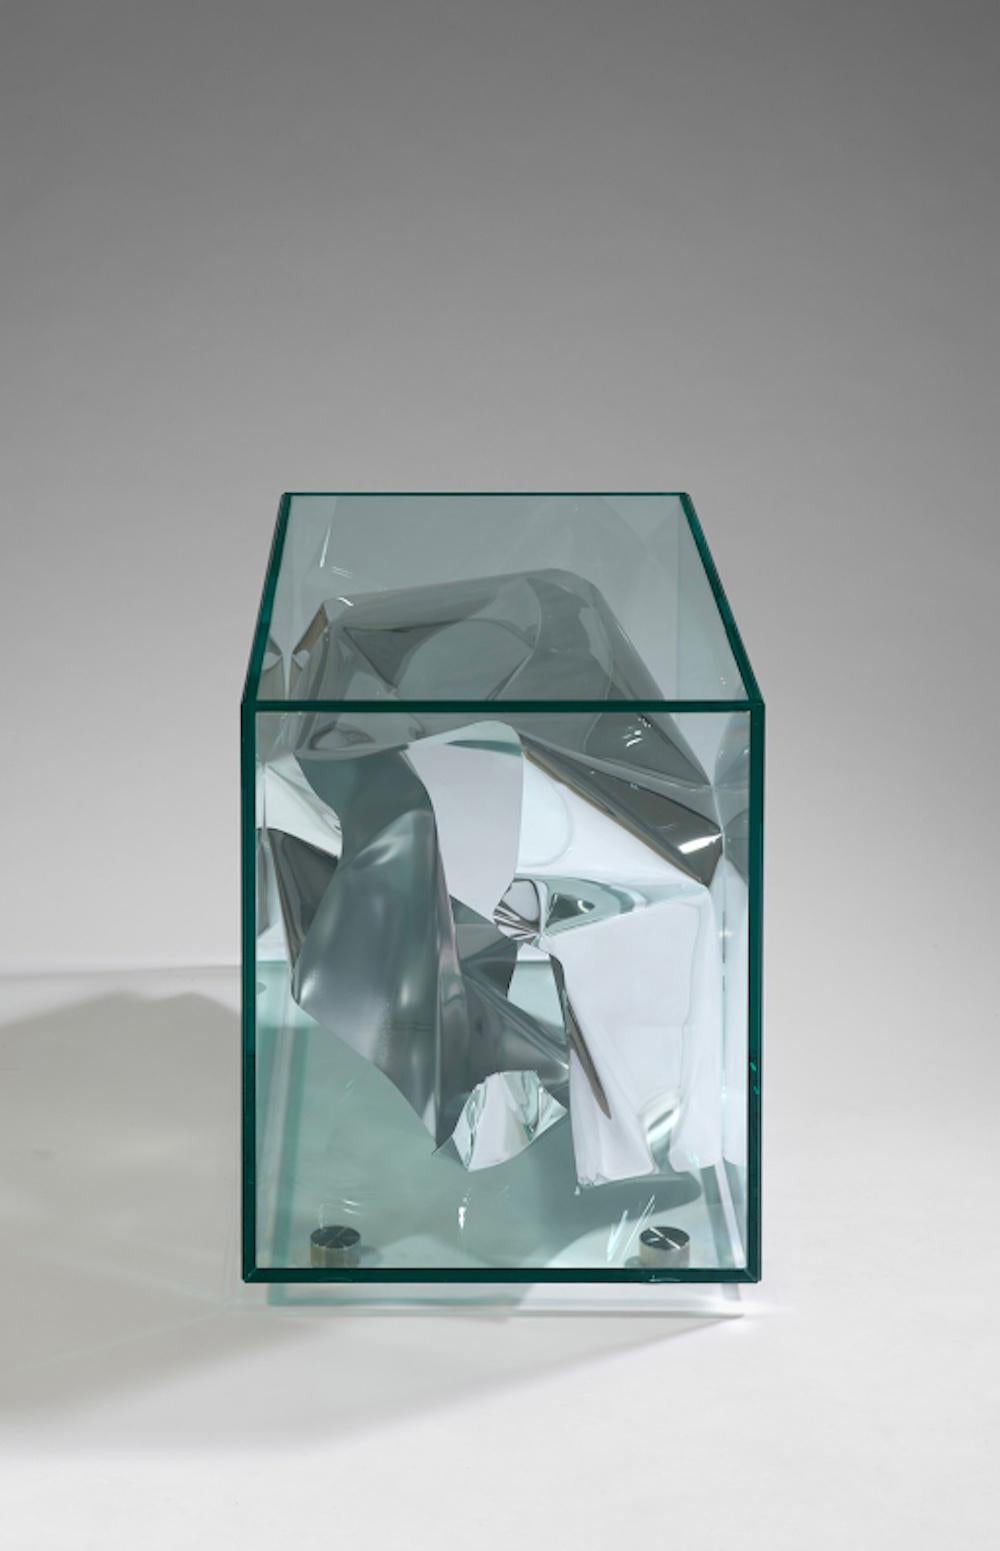 Fredrikson Stallard, UK Designers, side table 'Crush', 2012, Limited Edition of 20 + 2P + 2AP. Water polished aluminum sheet is hand formed by the artists and enclosed in a glass box. The table reflects its surroundings in an abstract, chameleon